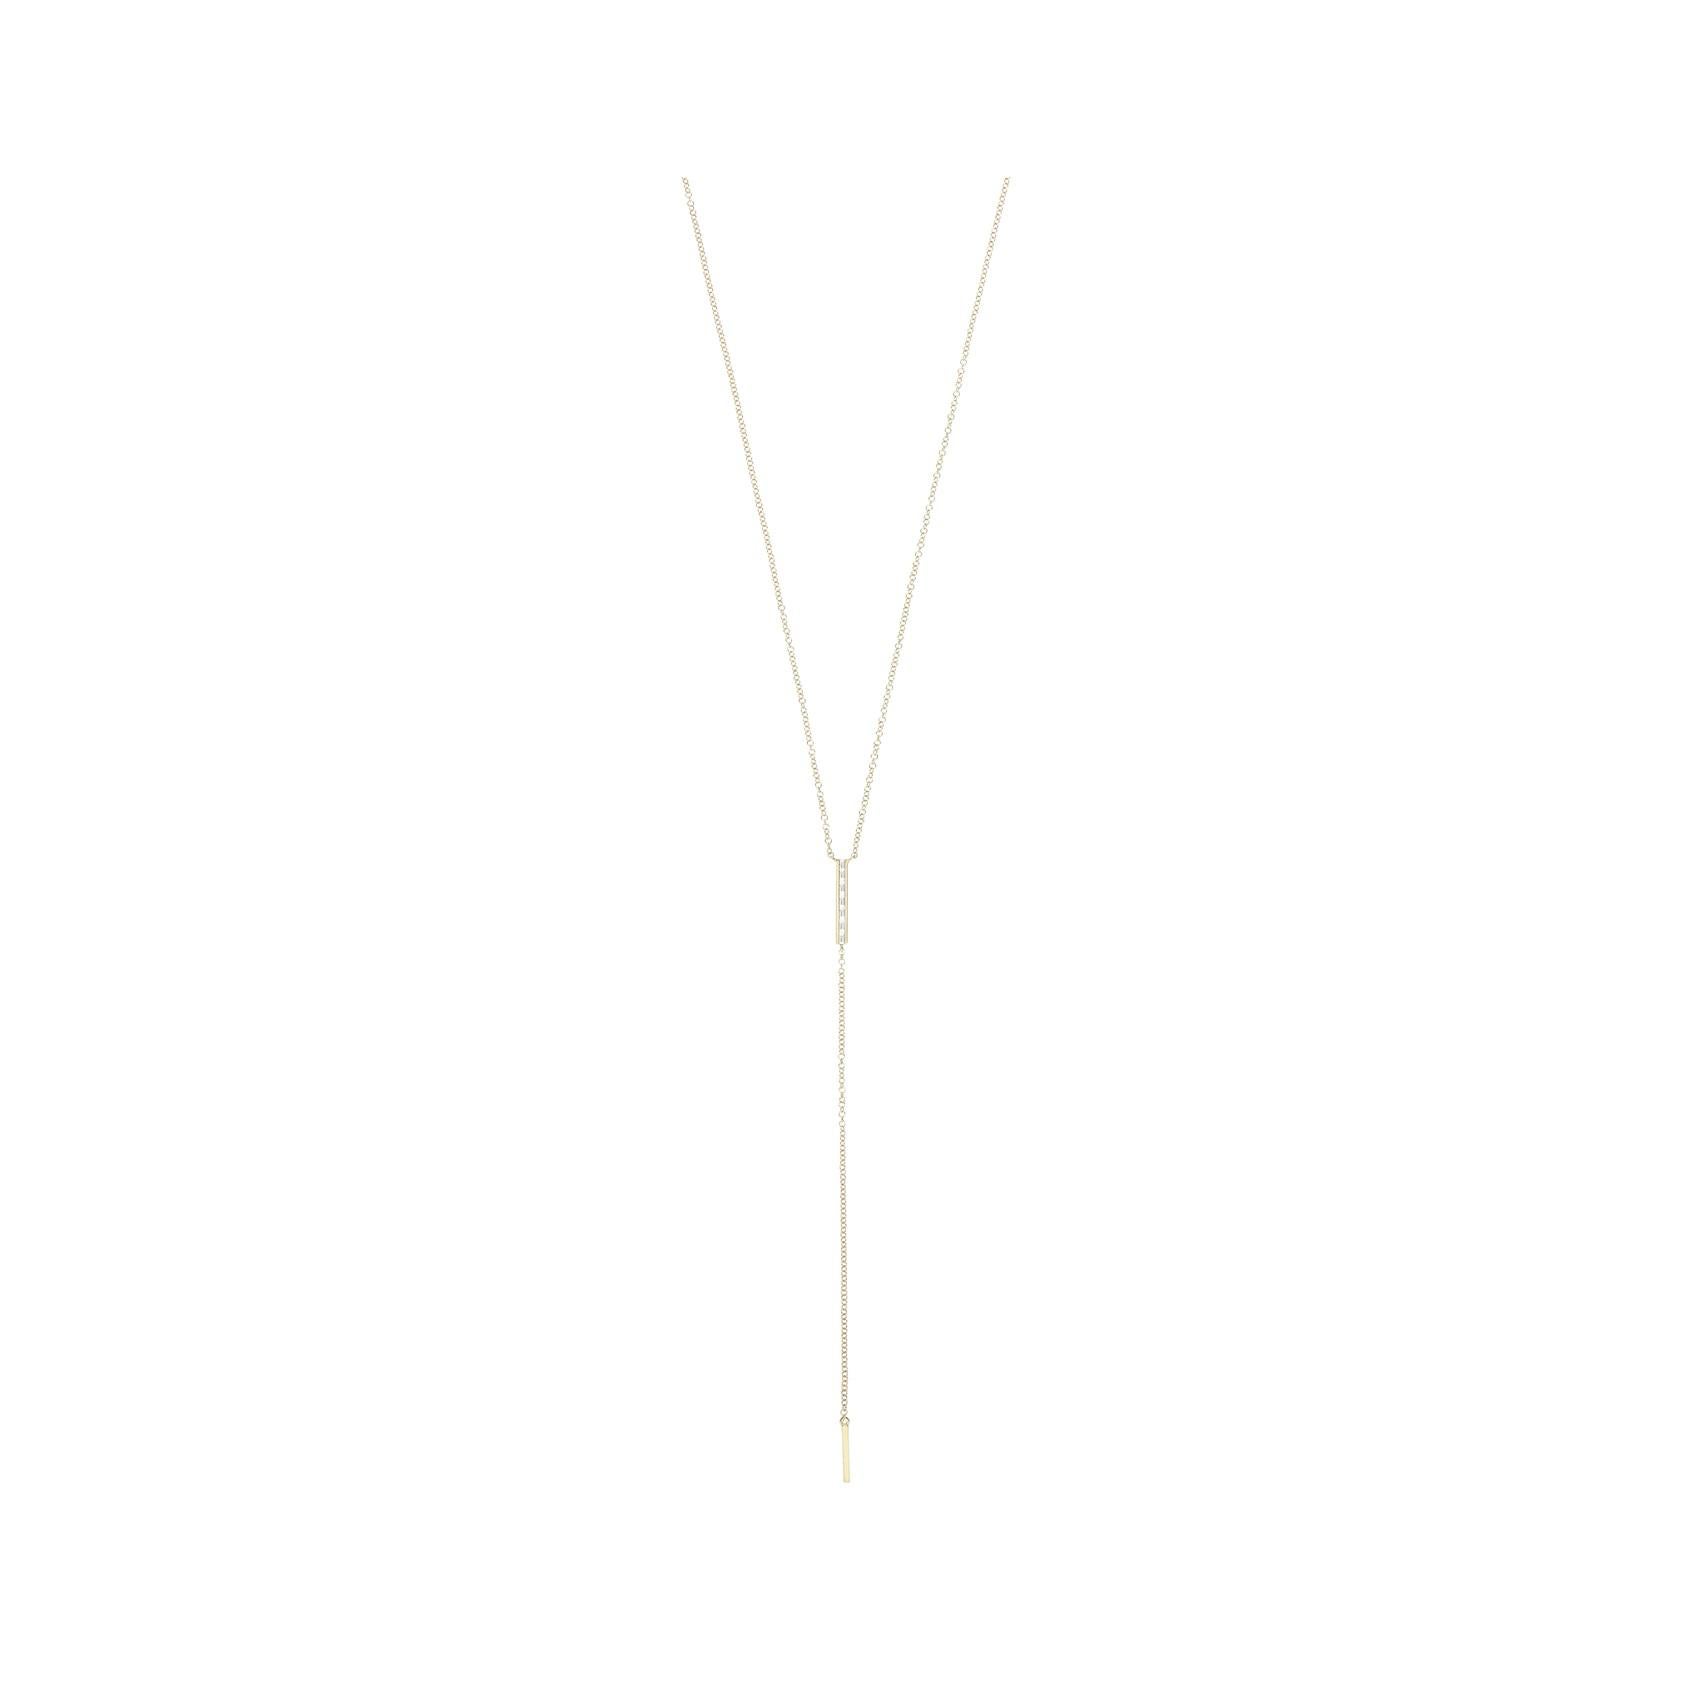 This Baguette Diamond Lariat Drop Pendant is made in 14 karat Yellow Gold, set with natural, colourless diamonds. With a total diamond carat weight (approximate) of 0.085 carat, The Diamonds are G-H colour, VS-Si clarity. This pendant is 40cm long